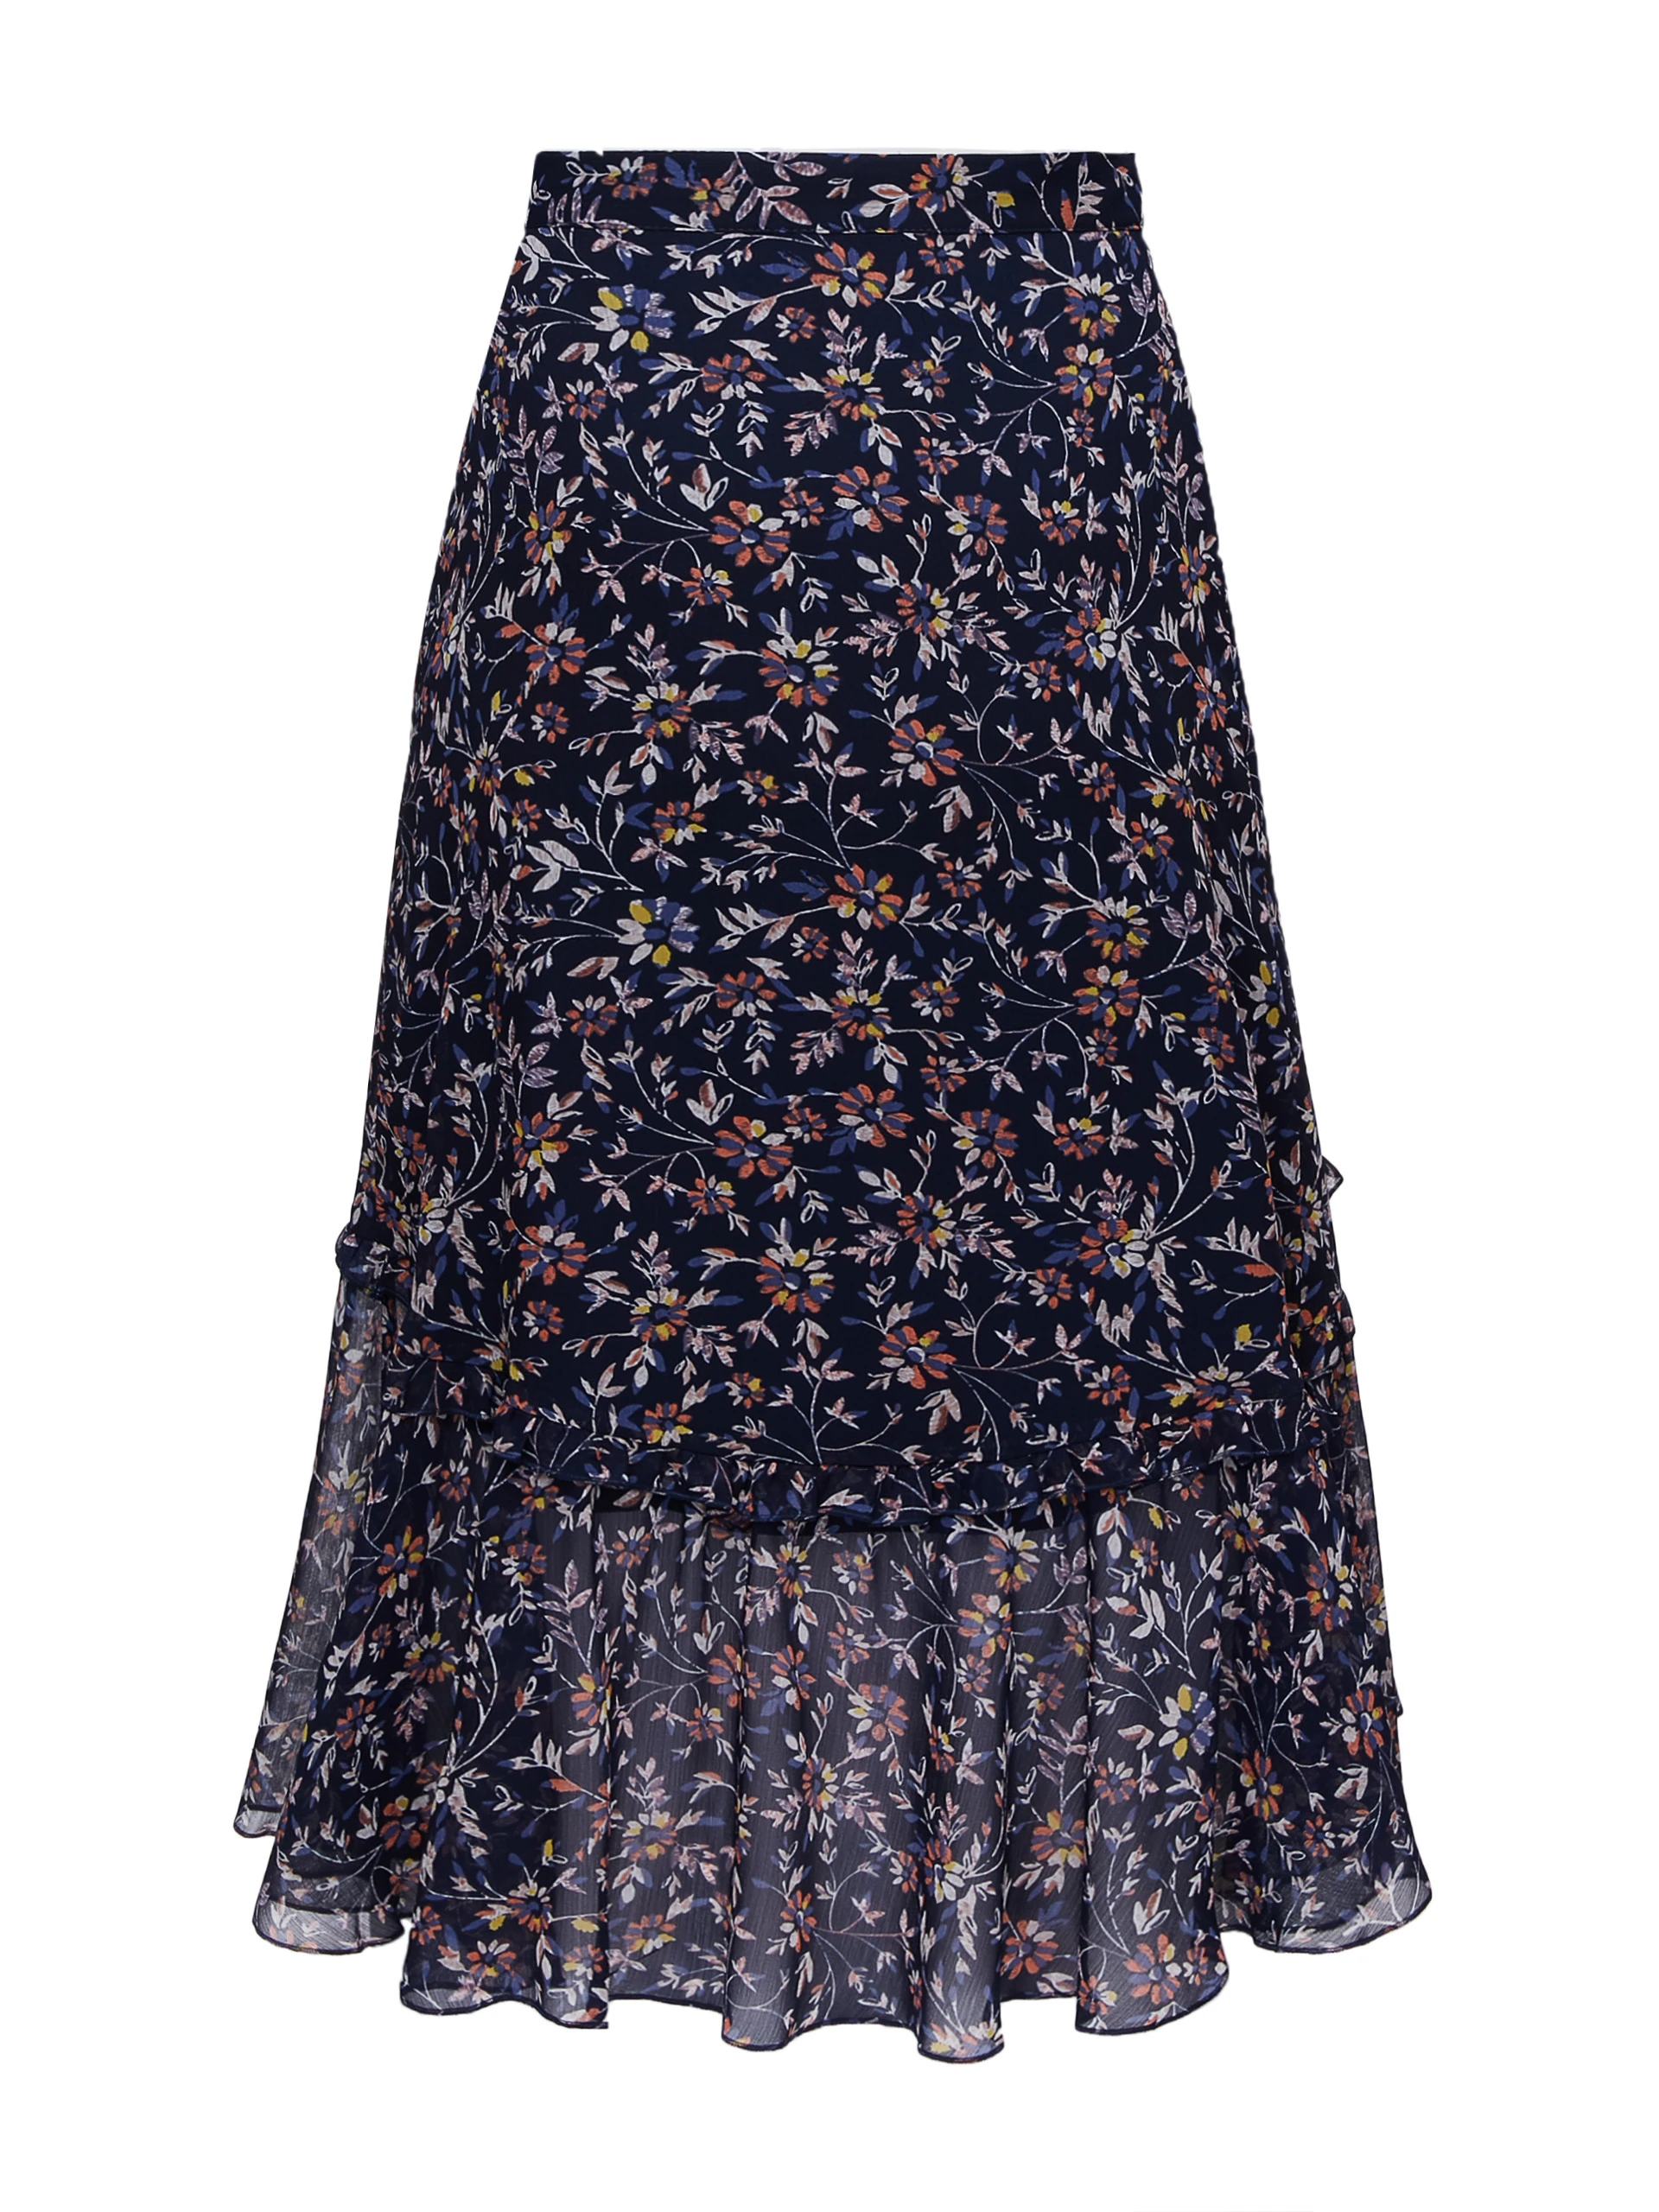 ETHEREAL SKIRT WITH FLORAL PATTERN